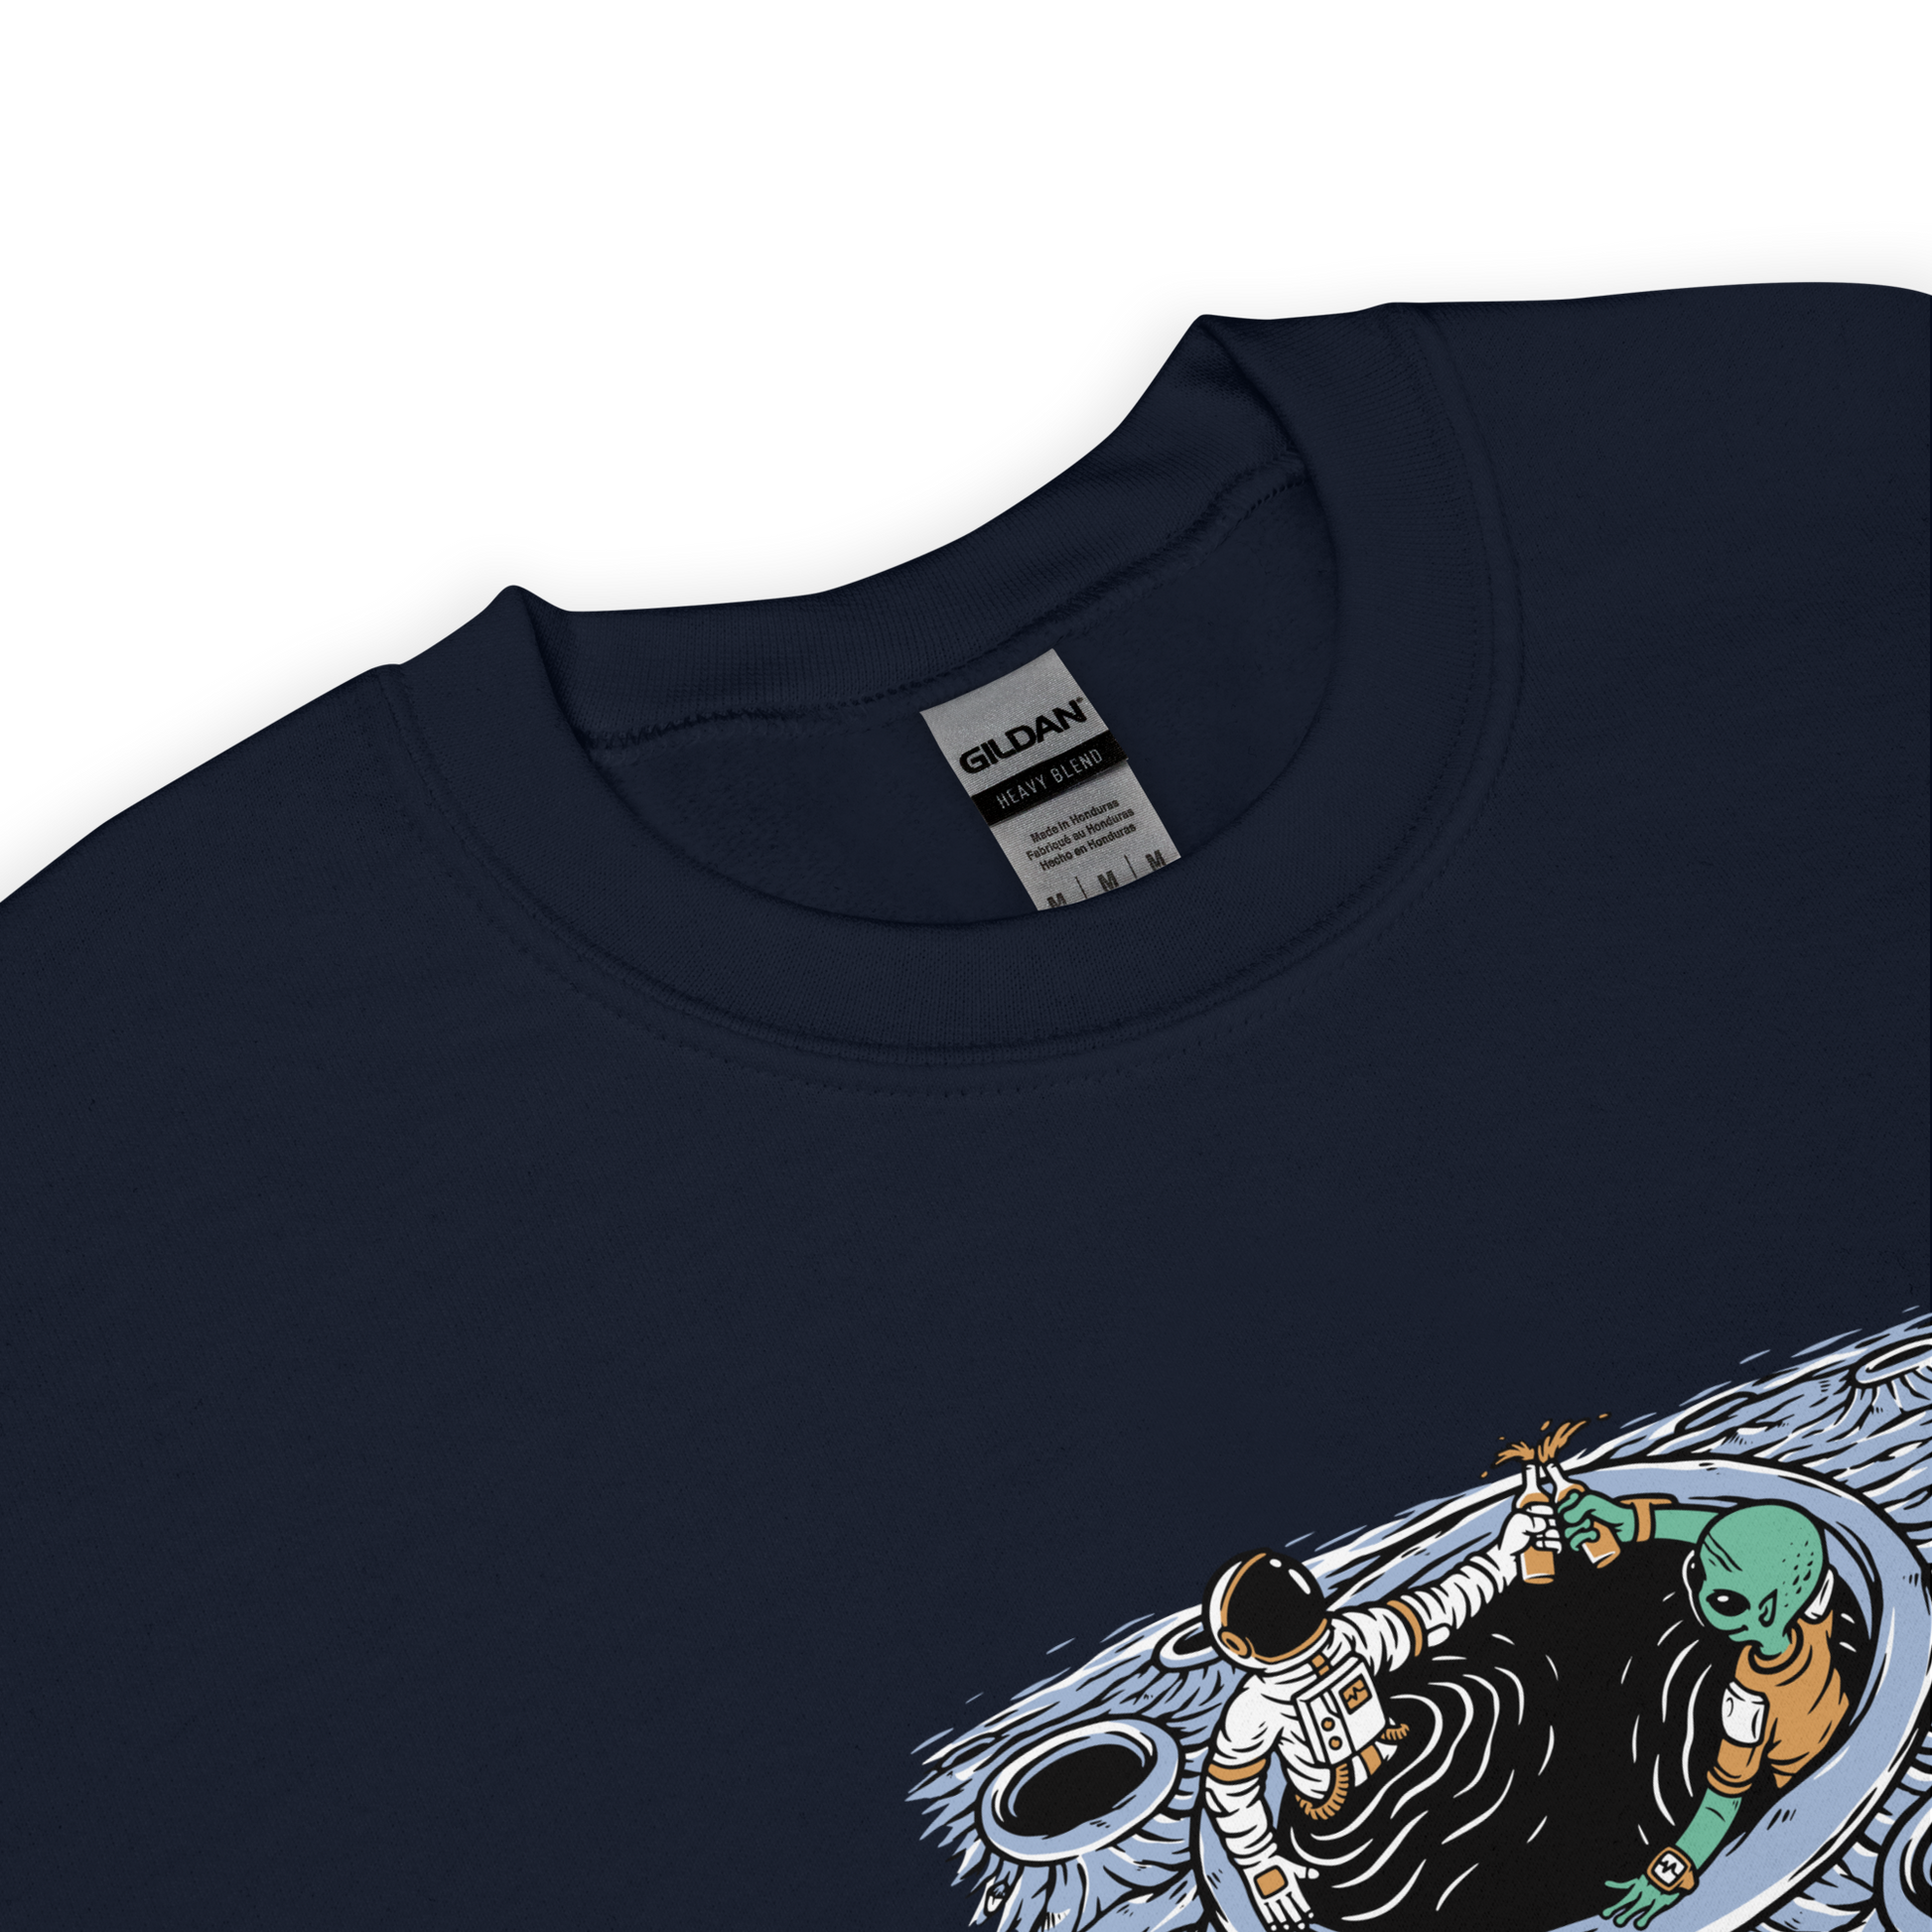 Product details of a Navy Galactic Hangs Sweatshirt featuring an out-of-this-world graphic of an Astronaut and Alien Chilling Together - Funny Graphic Space Sweatshirts - Boozy Fox